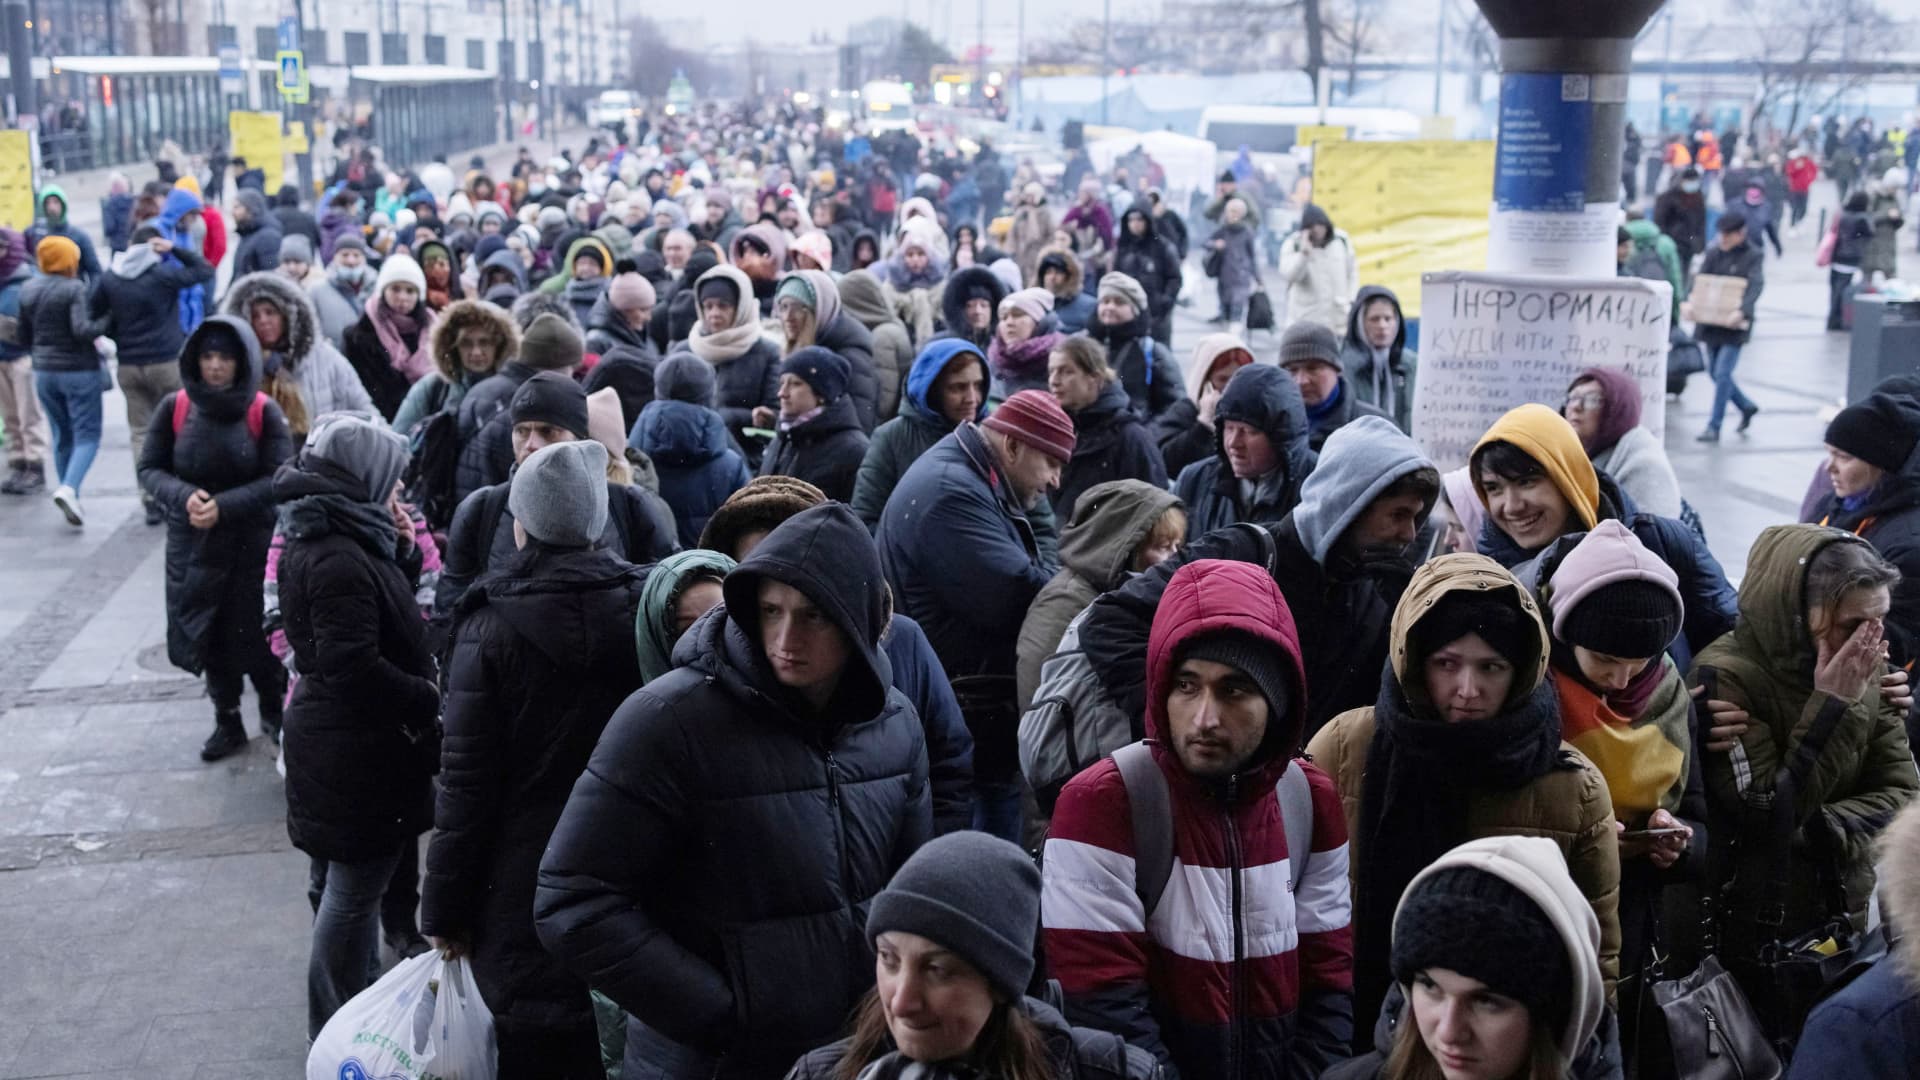 Refugees queue for trains to Poland following the Russian invasion of Ukraine, at the train station in Lviv, Ukraine, March 7, 2022.